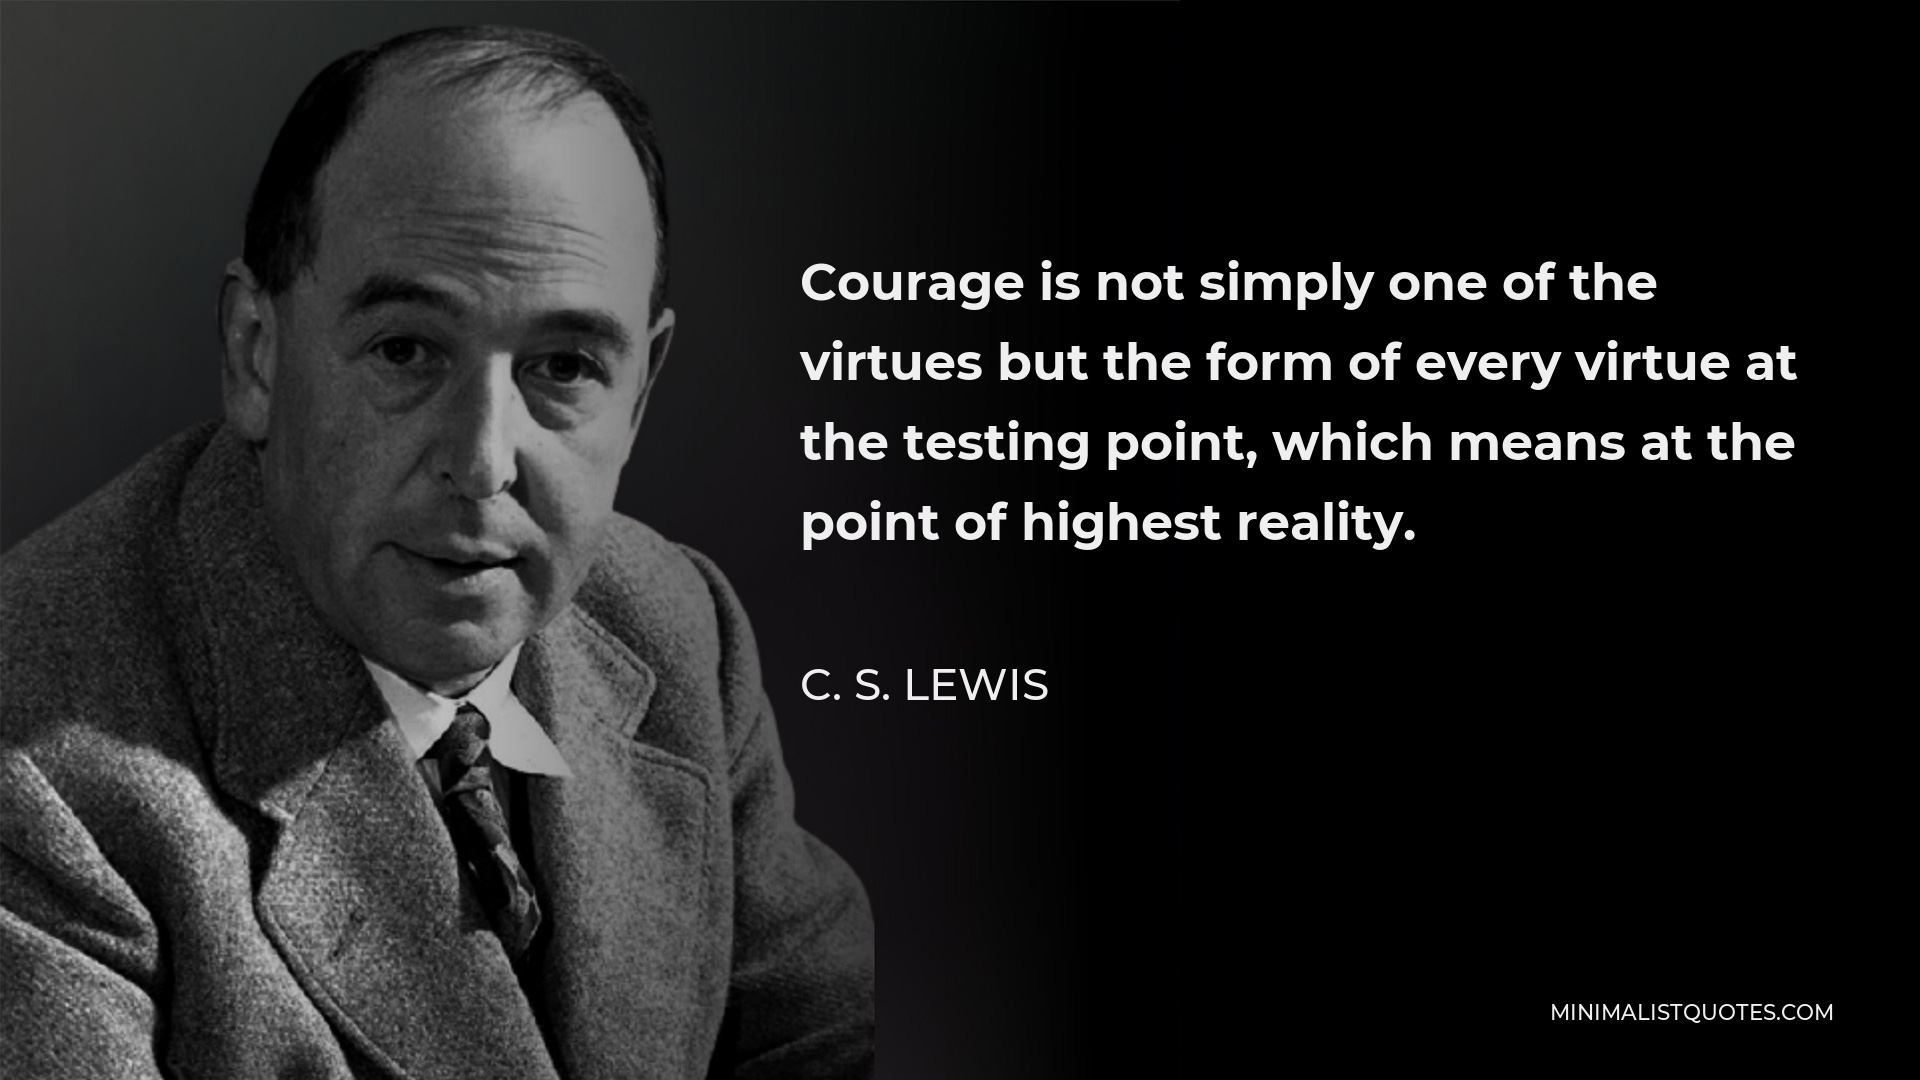 C. S. Lewis Quote - Courage is not simply one of the virtues but the form of every virtue at the testing point, which means at the point of highest reality.